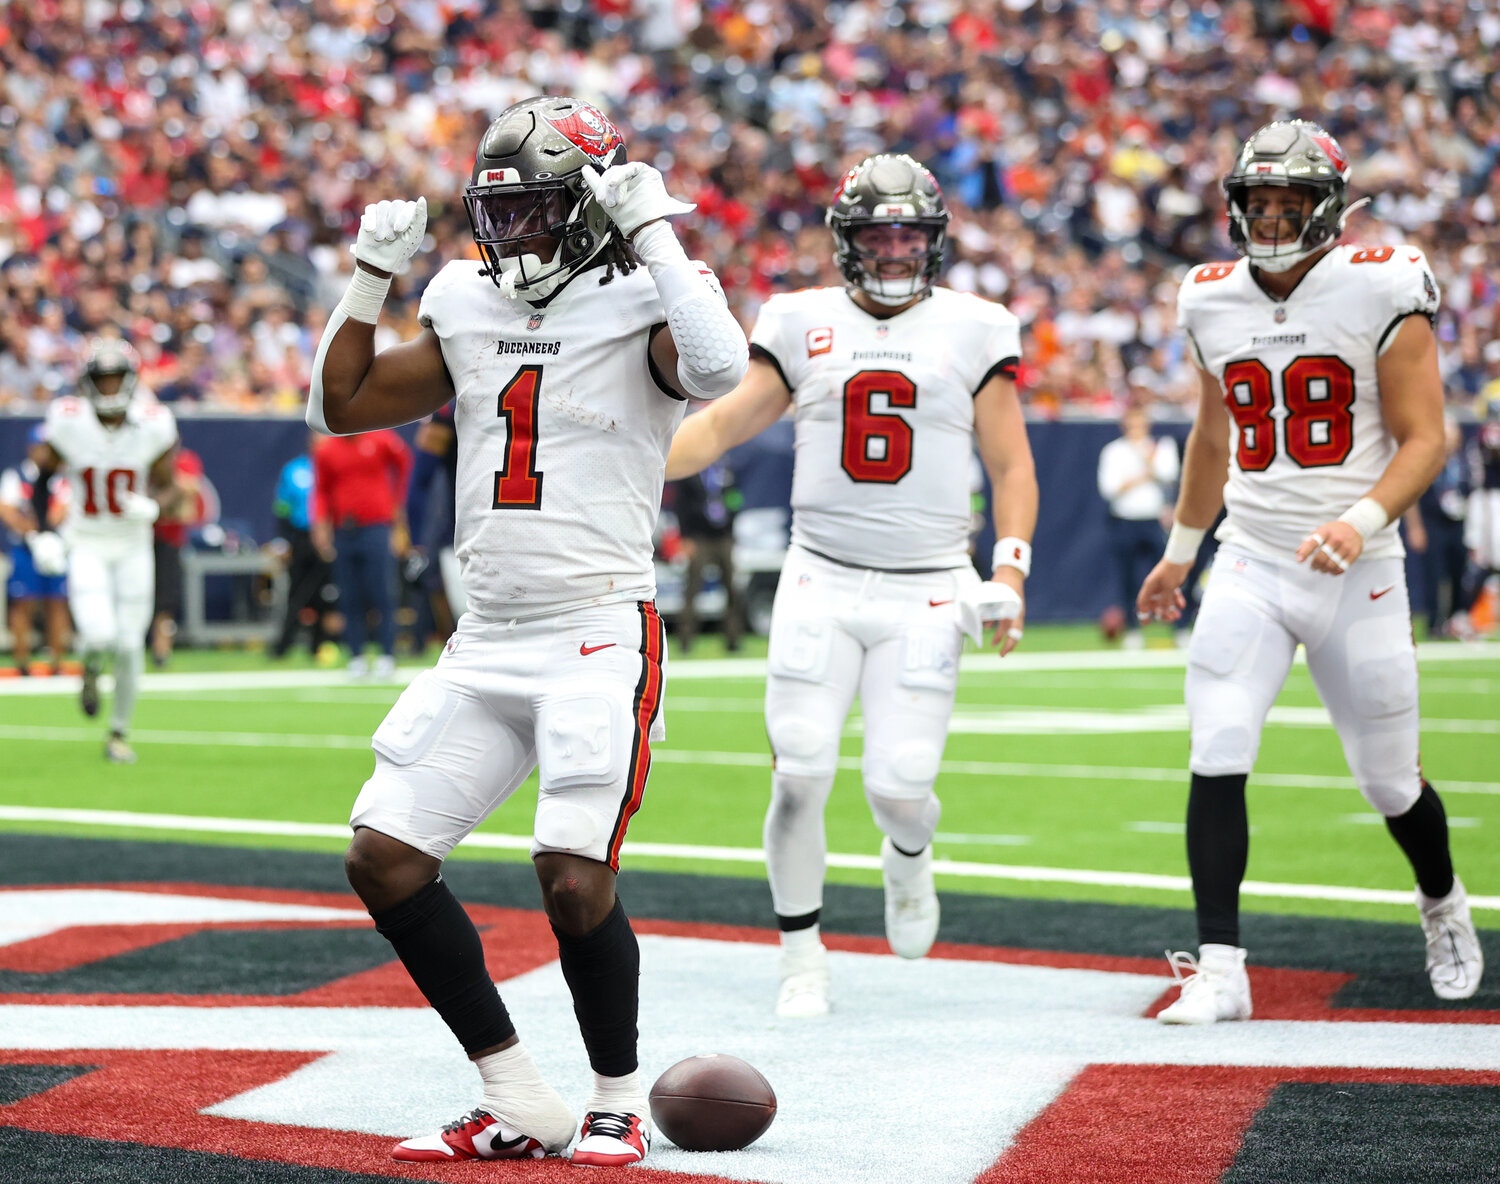 Buccaneers running back Rachaad White (1) celebrates after scoring on a 1-yard touchdown run during an NFL game between the Houston Texans and the Tampa Bay Buccaneers on November 5, 2023 in Houston.